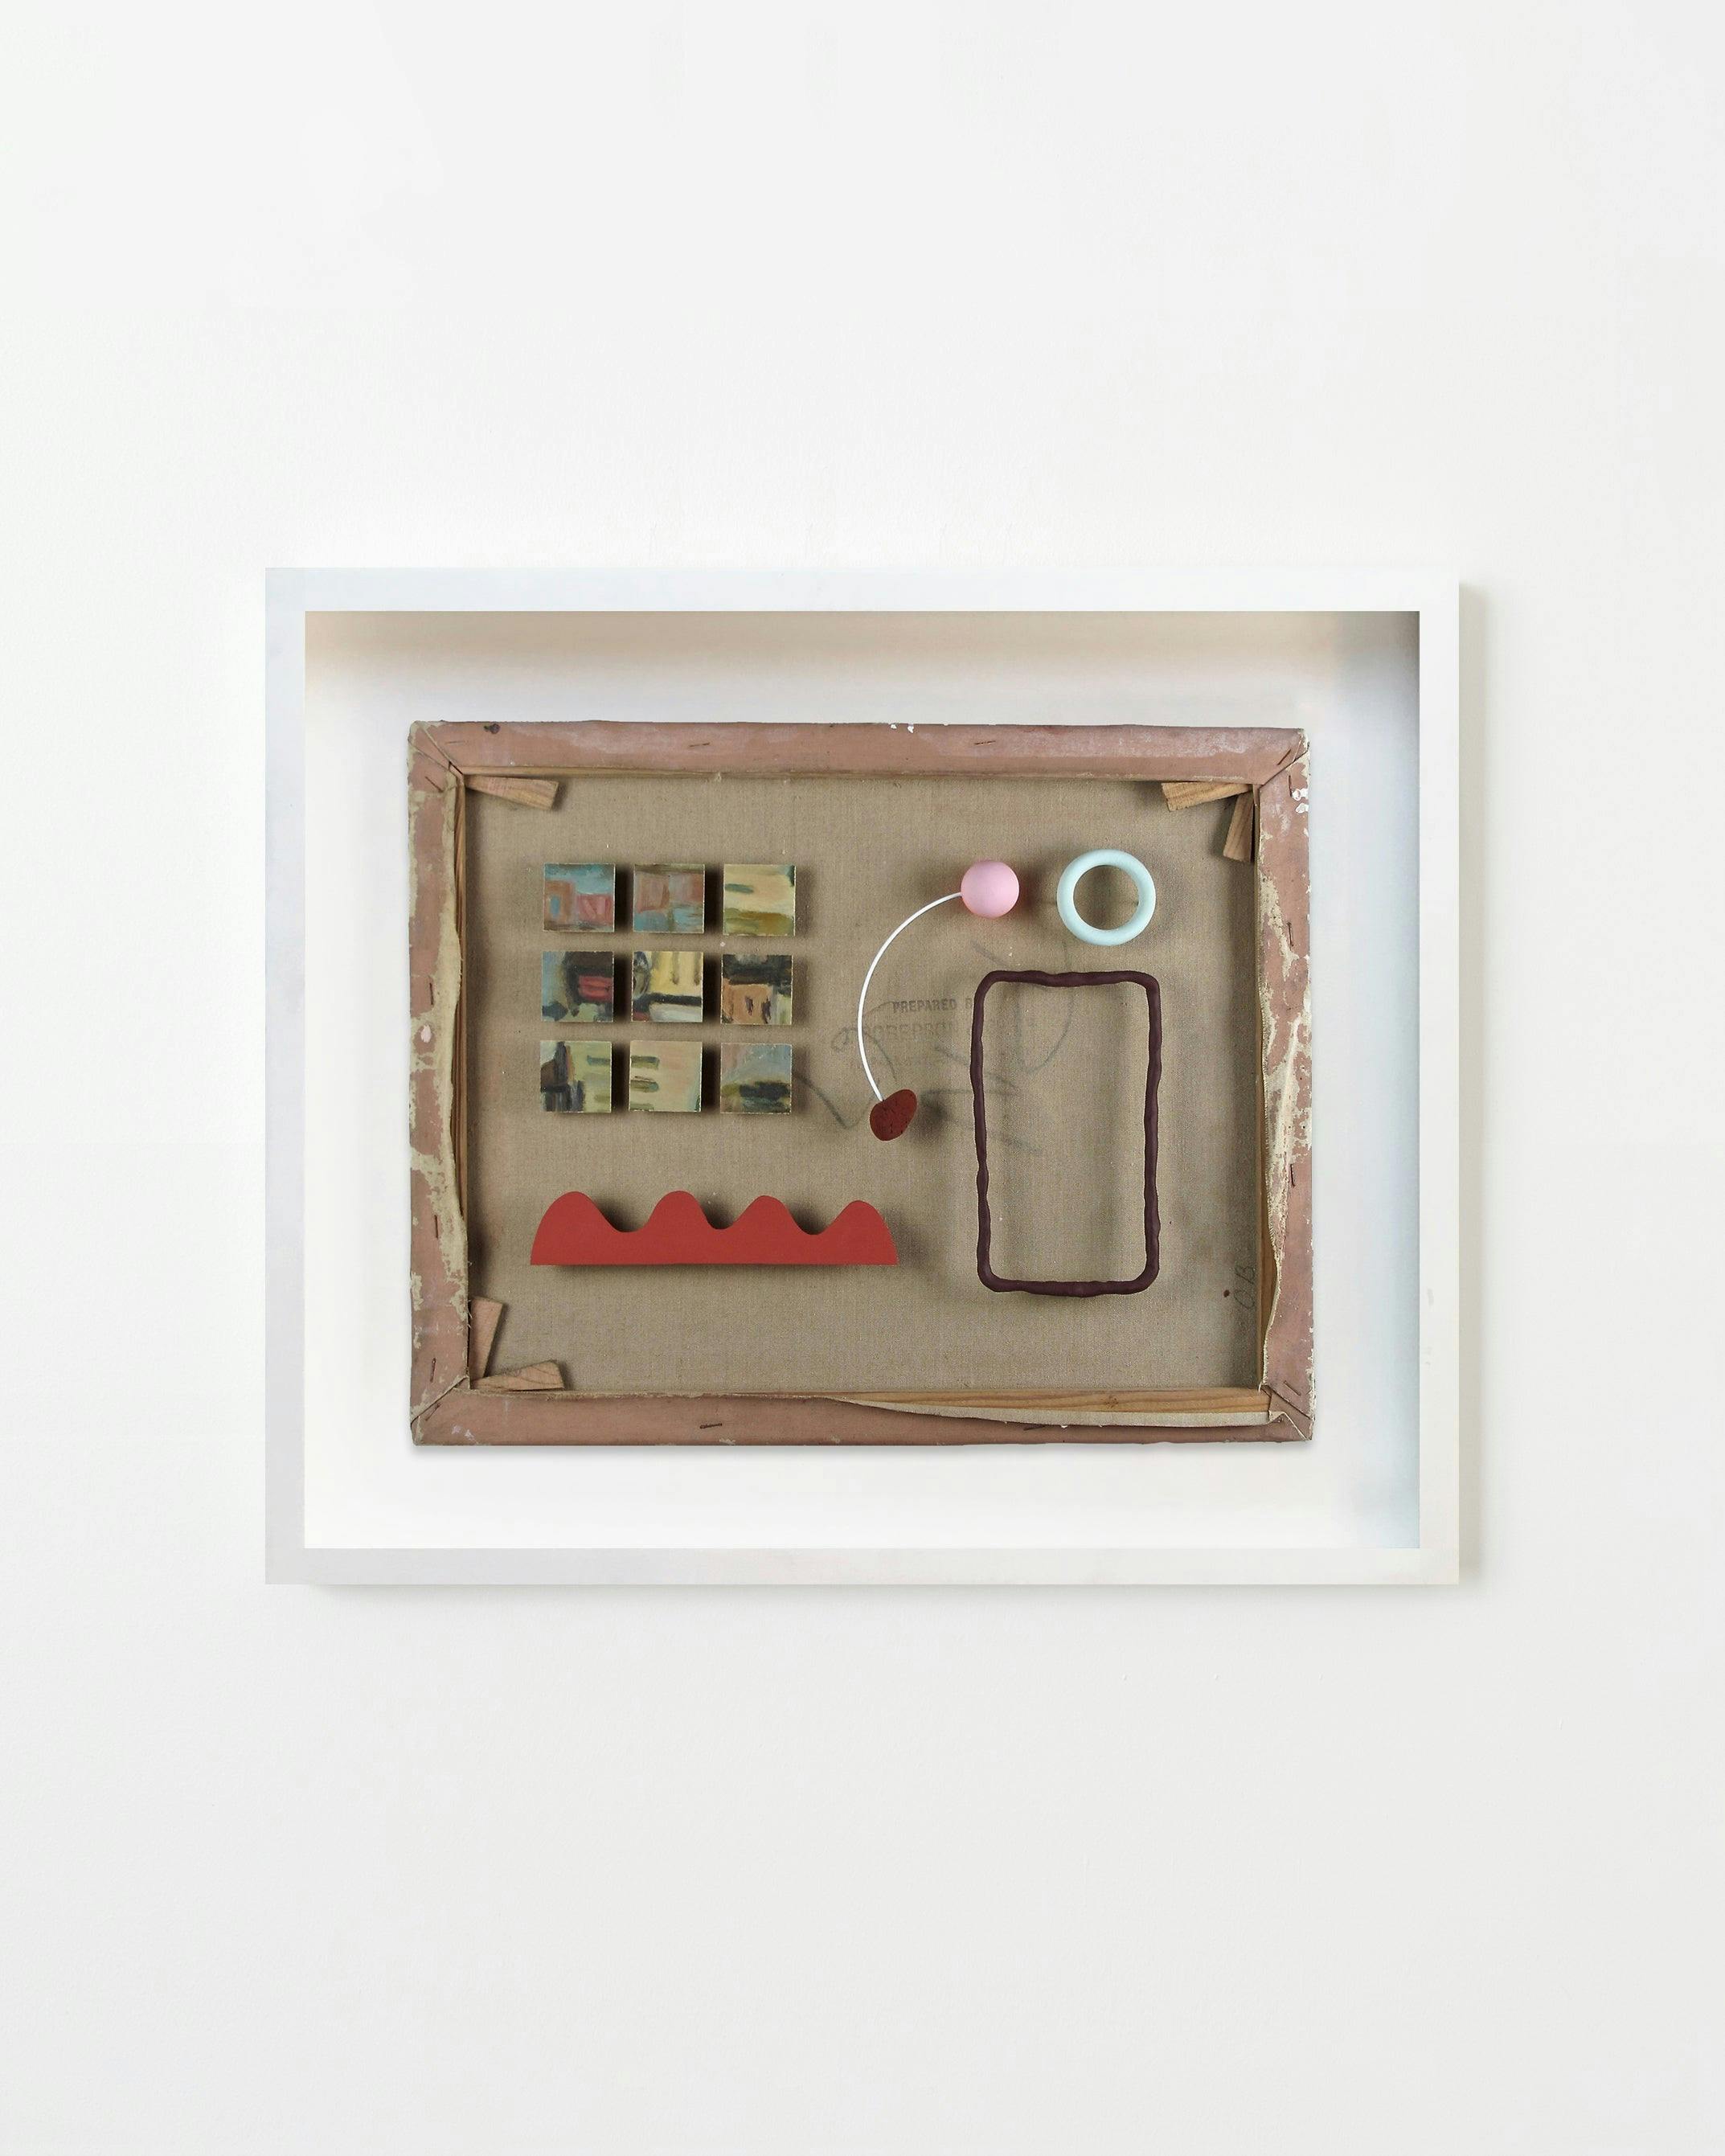 Mixed Media by Ferris McGuinty titled "Untitled (1701)".